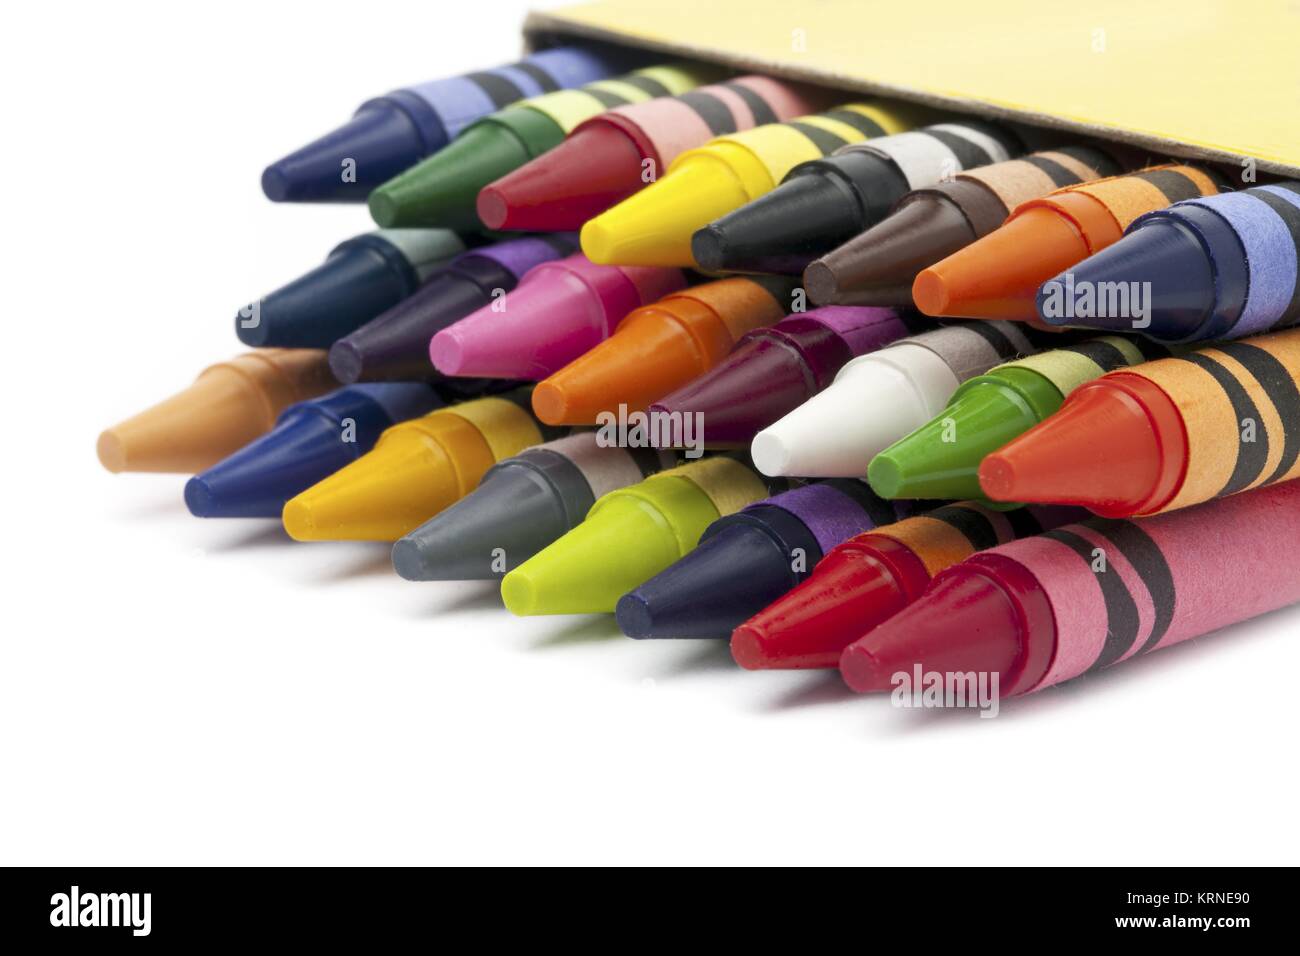 image of wax crayons over white background. Stock Photo